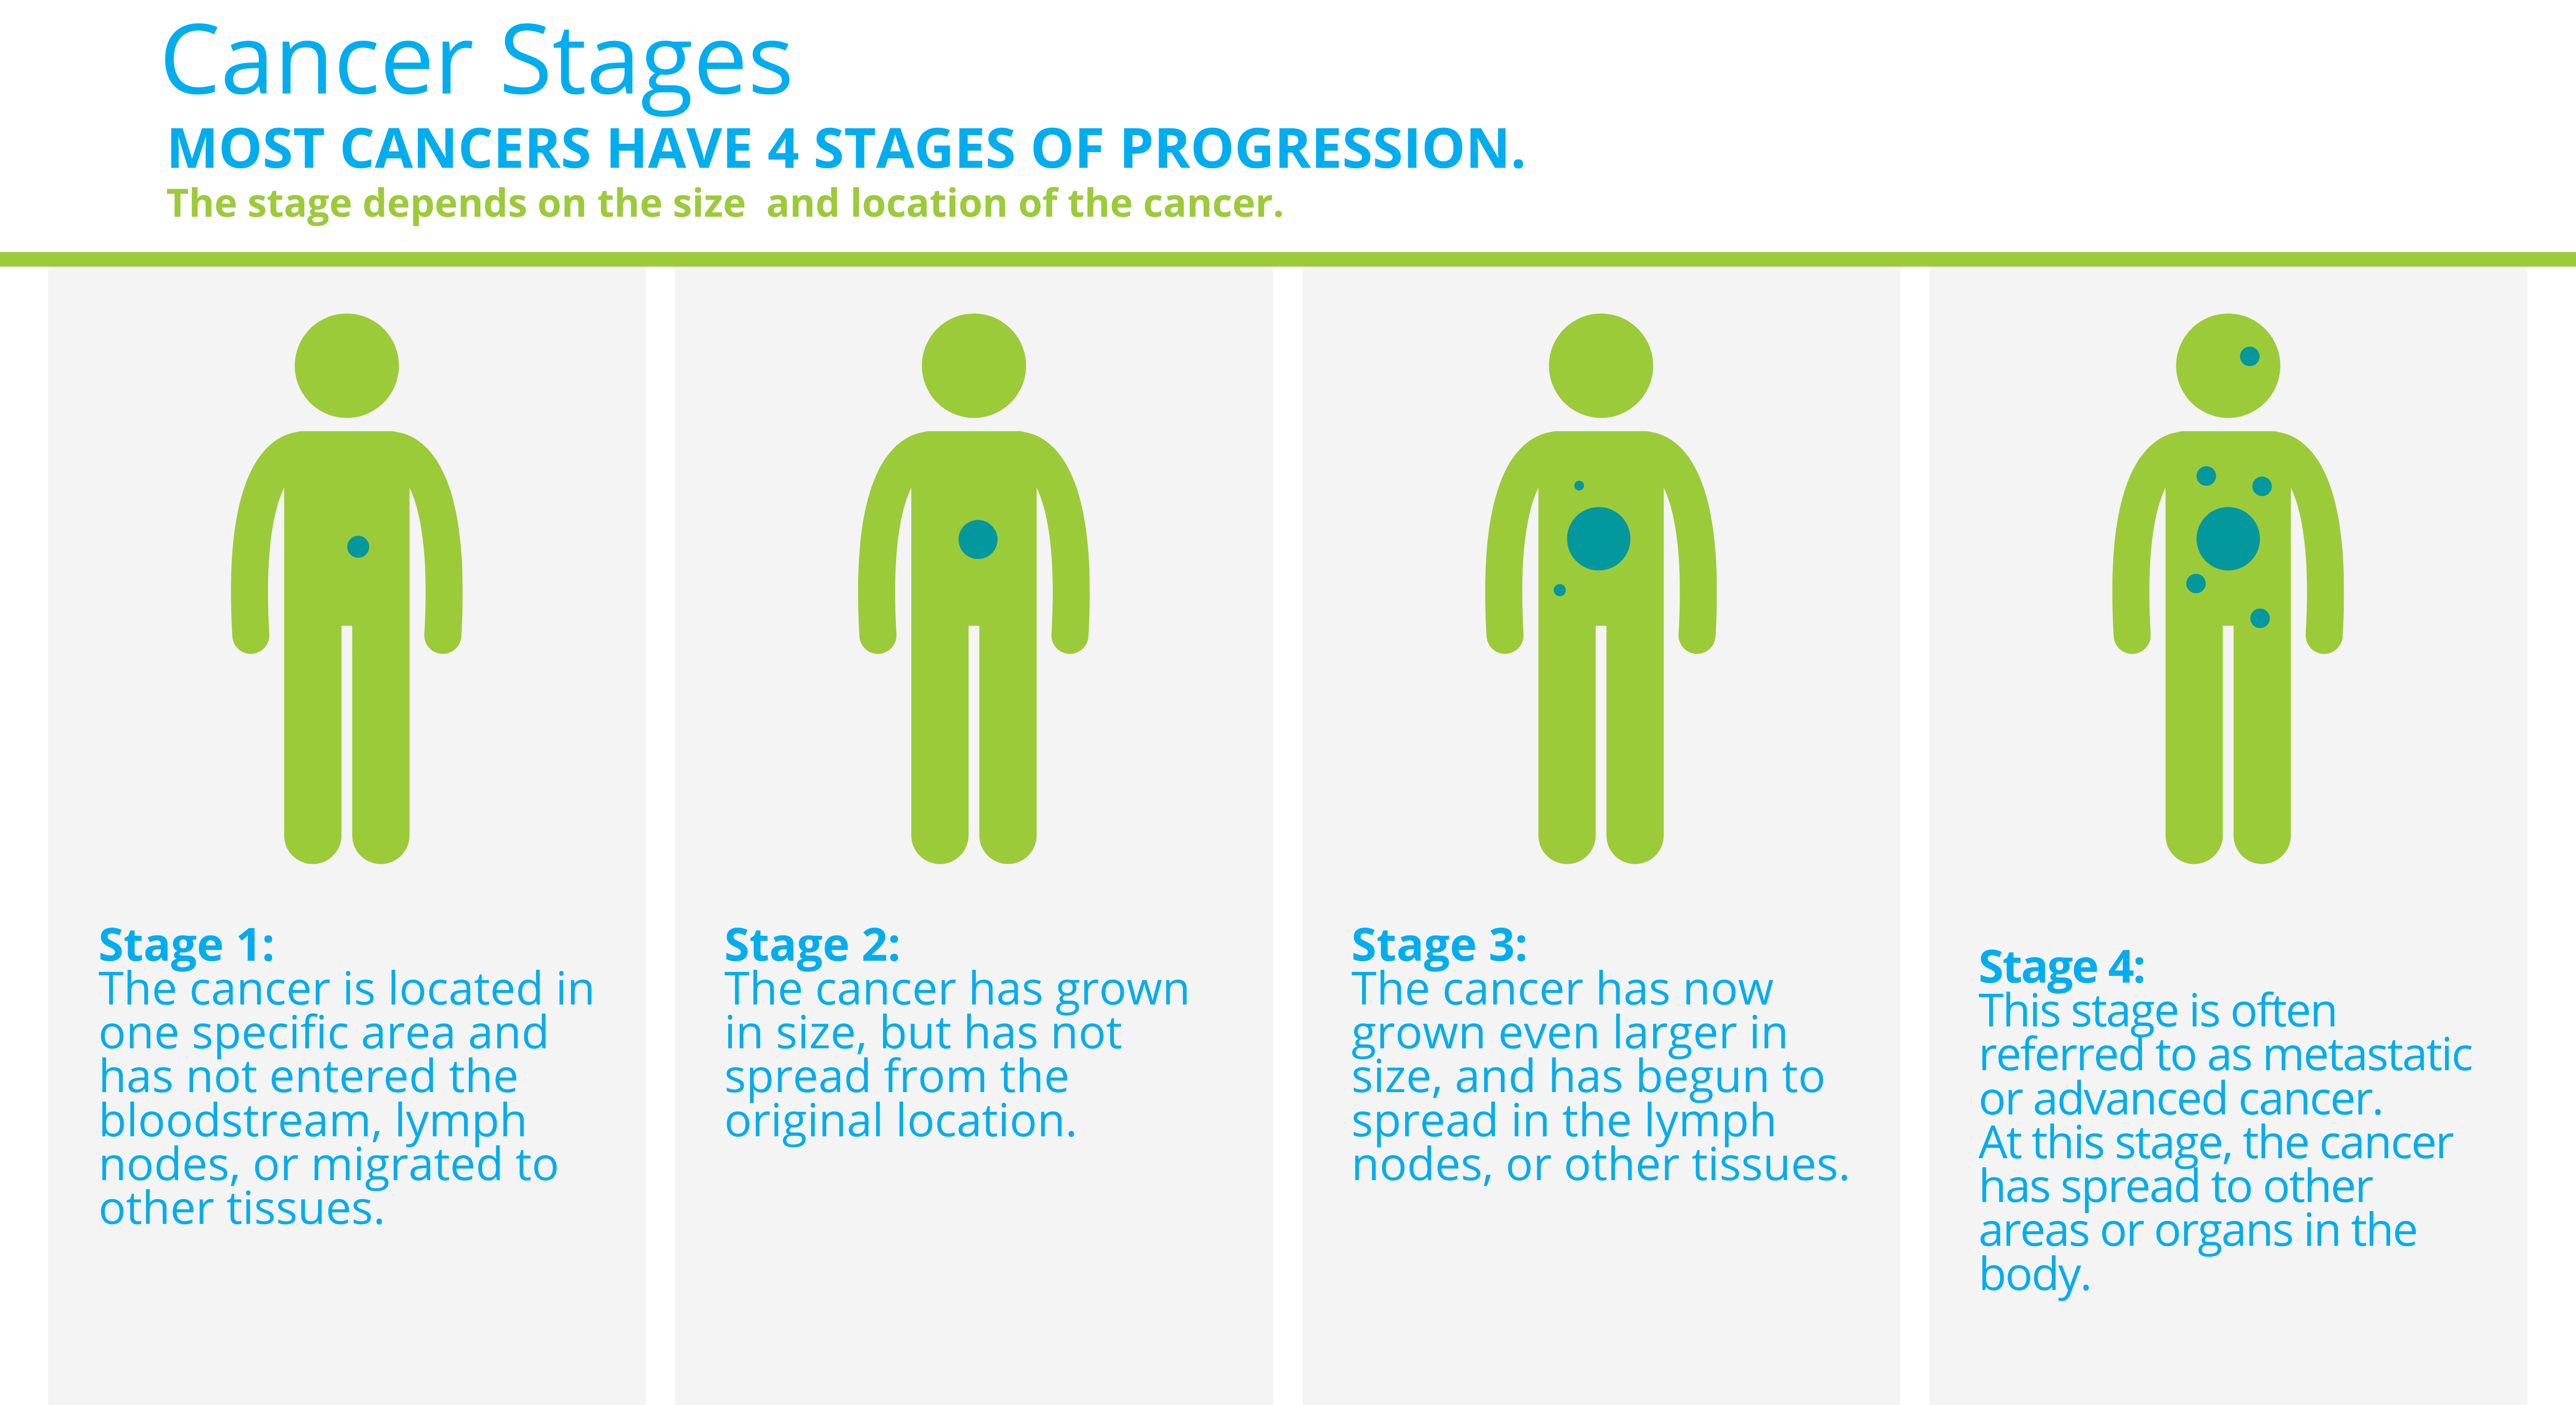 Cancer Stages Most cancers have four stages of progression. The stage depends on the size and location of the cancer. Stage l: The cancer is located in one specific area and has not entered the bloodstream, lymph nodes, or migrated to other tissues. Stage ll: The cancer has grown in size, but has not spread from the original location. Stage lll: The cancer has now grown even larger in size, and has begun to spread in the lymph nodes, or other tissues. Stage lV: This stage is often referred to as metastatic or advanced cancer. At this stage, the cancer has spread to other areas or organs in the body.